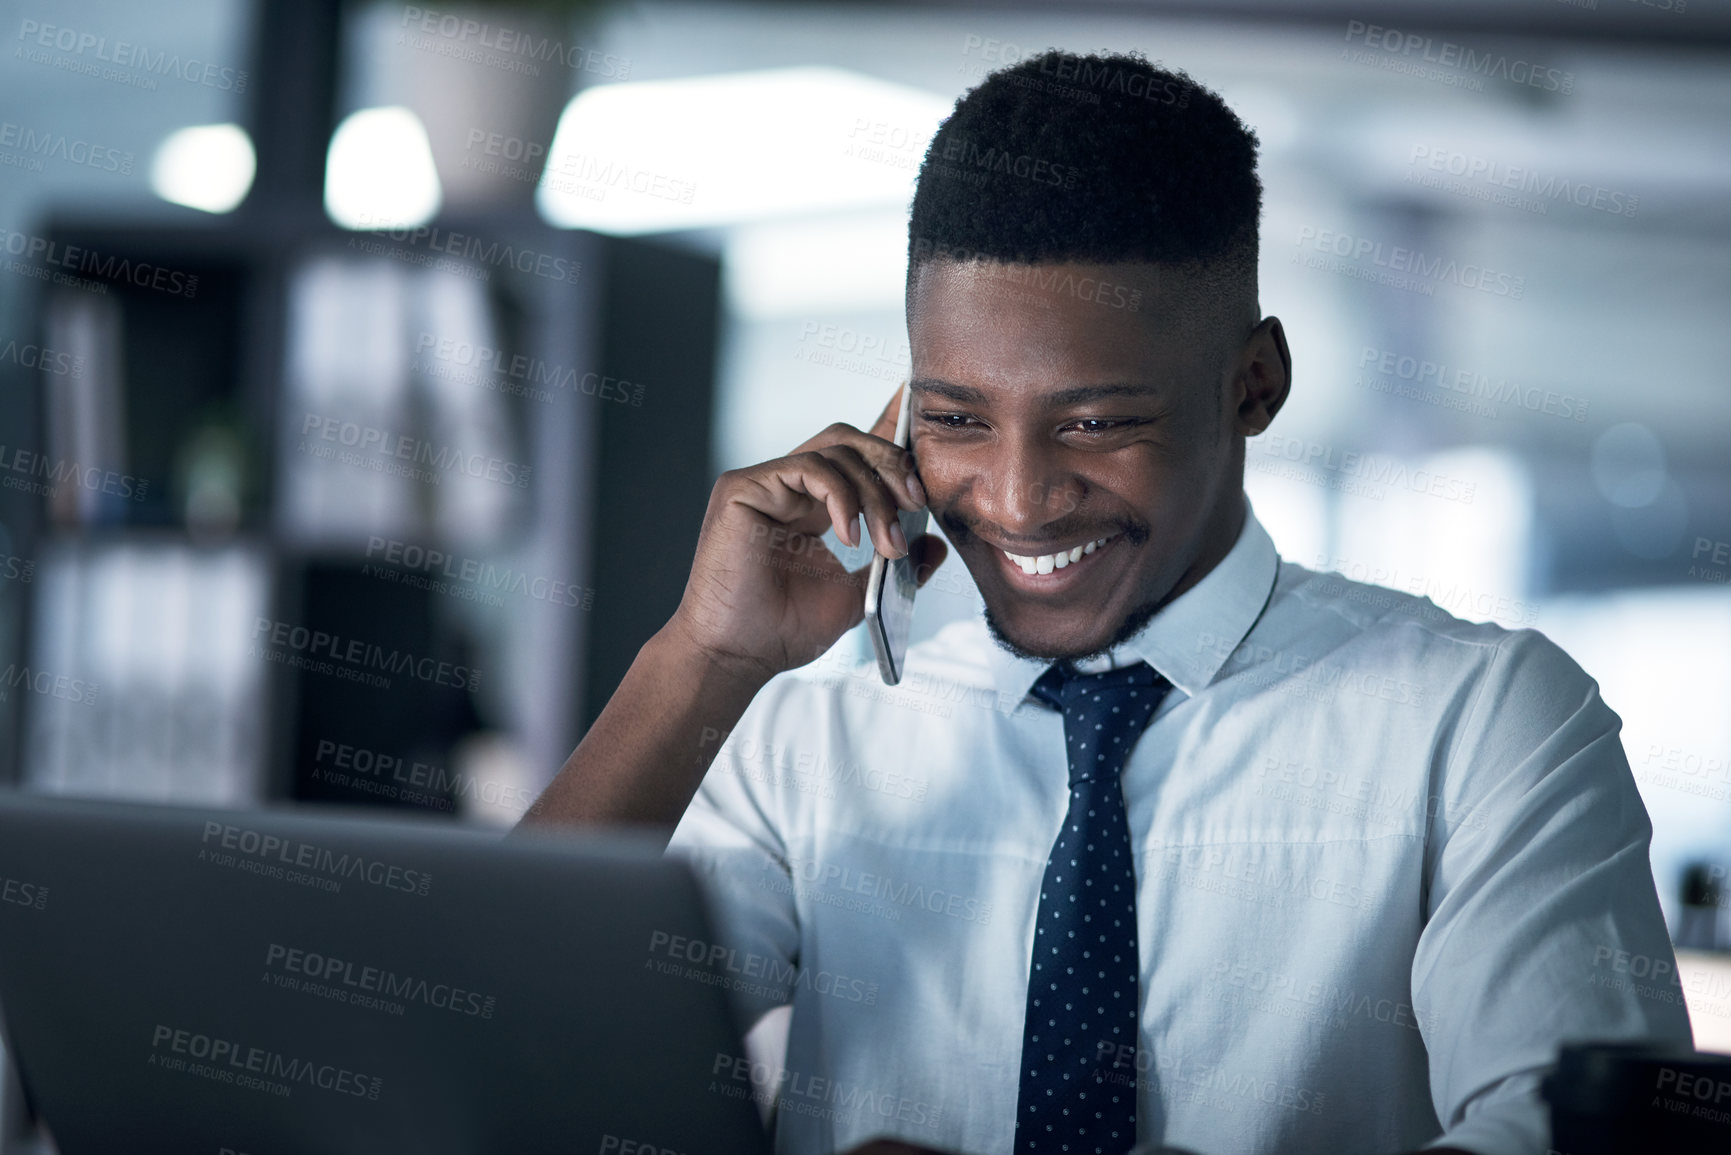 Buy stock photo Shot of a young businessman talking on a cellphone while working on a laptop in an office at night